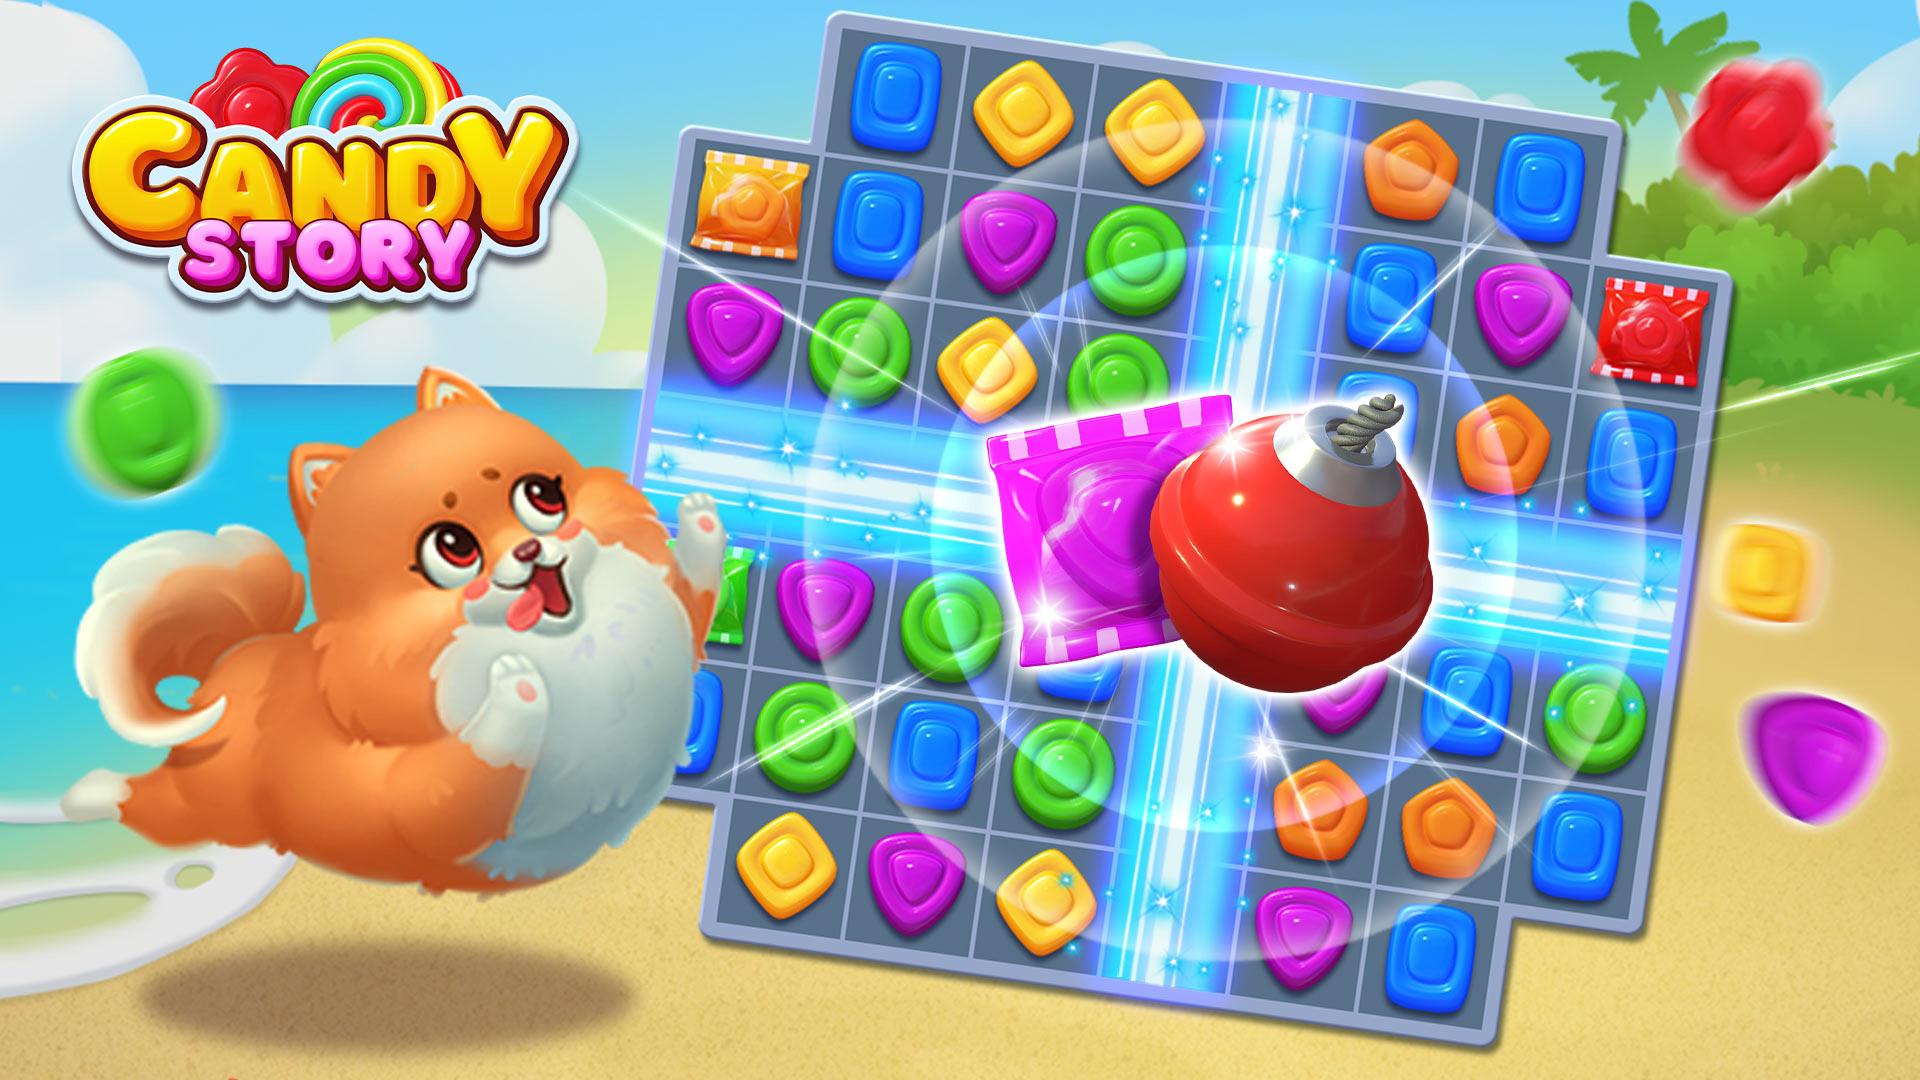 Sweet Candy игра. Sweet Candy Match 3. Candy charming-Match 3 Puzzle. Игра-пазл remember, Candy. Candy story